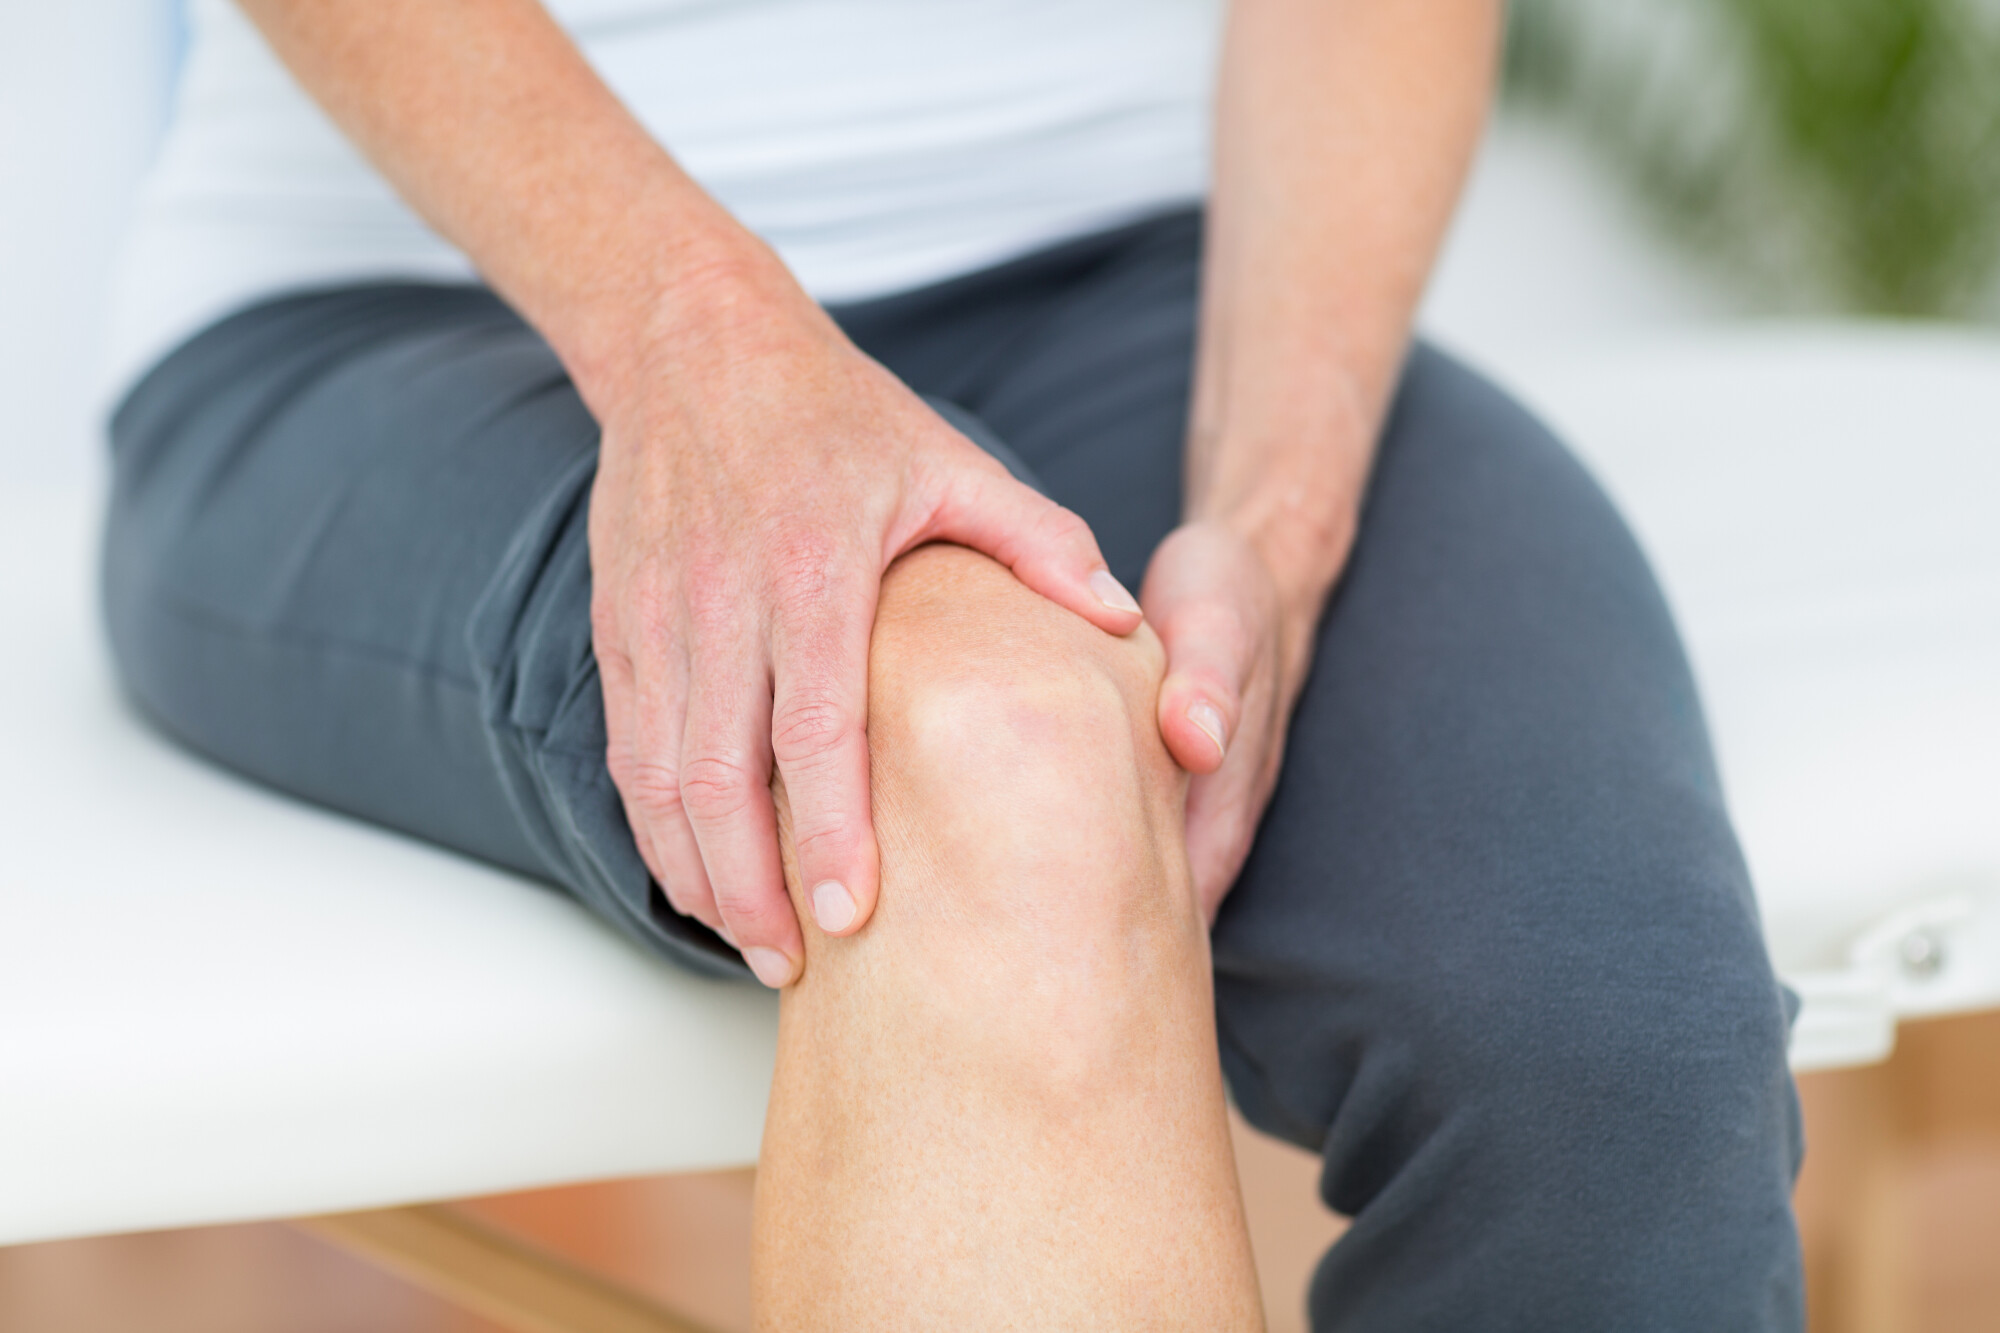 Dancer knee pain can be scary. Let's take a look at the common causes and the best treatment options to relieve the pain and avoid further damage.